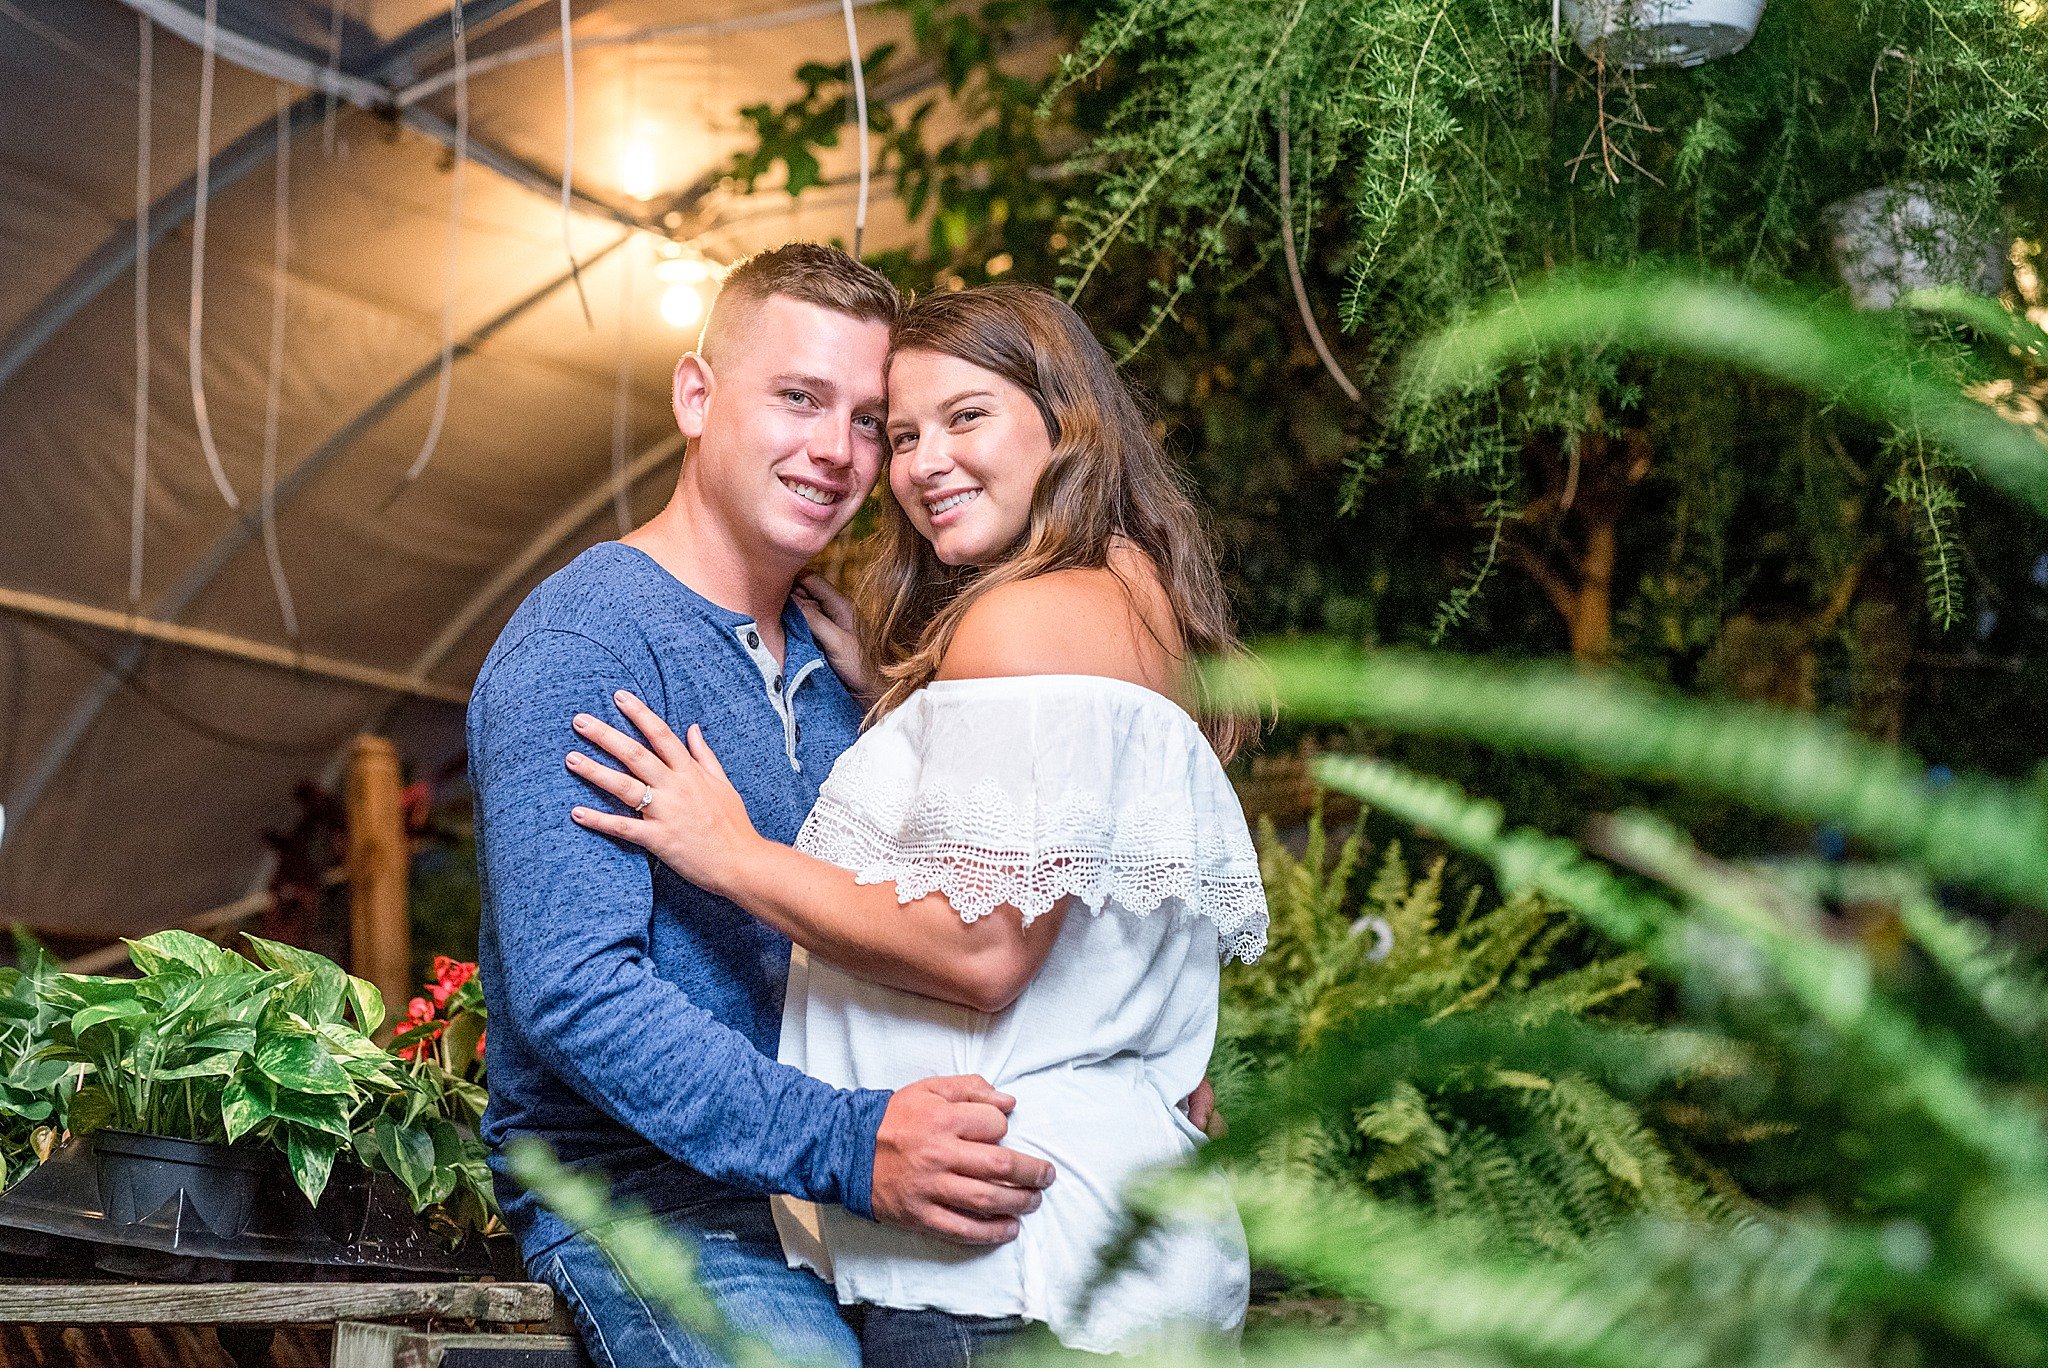 Tudbinks Greenhouse Lancaster County Greenhouse Engagement Session Photography 